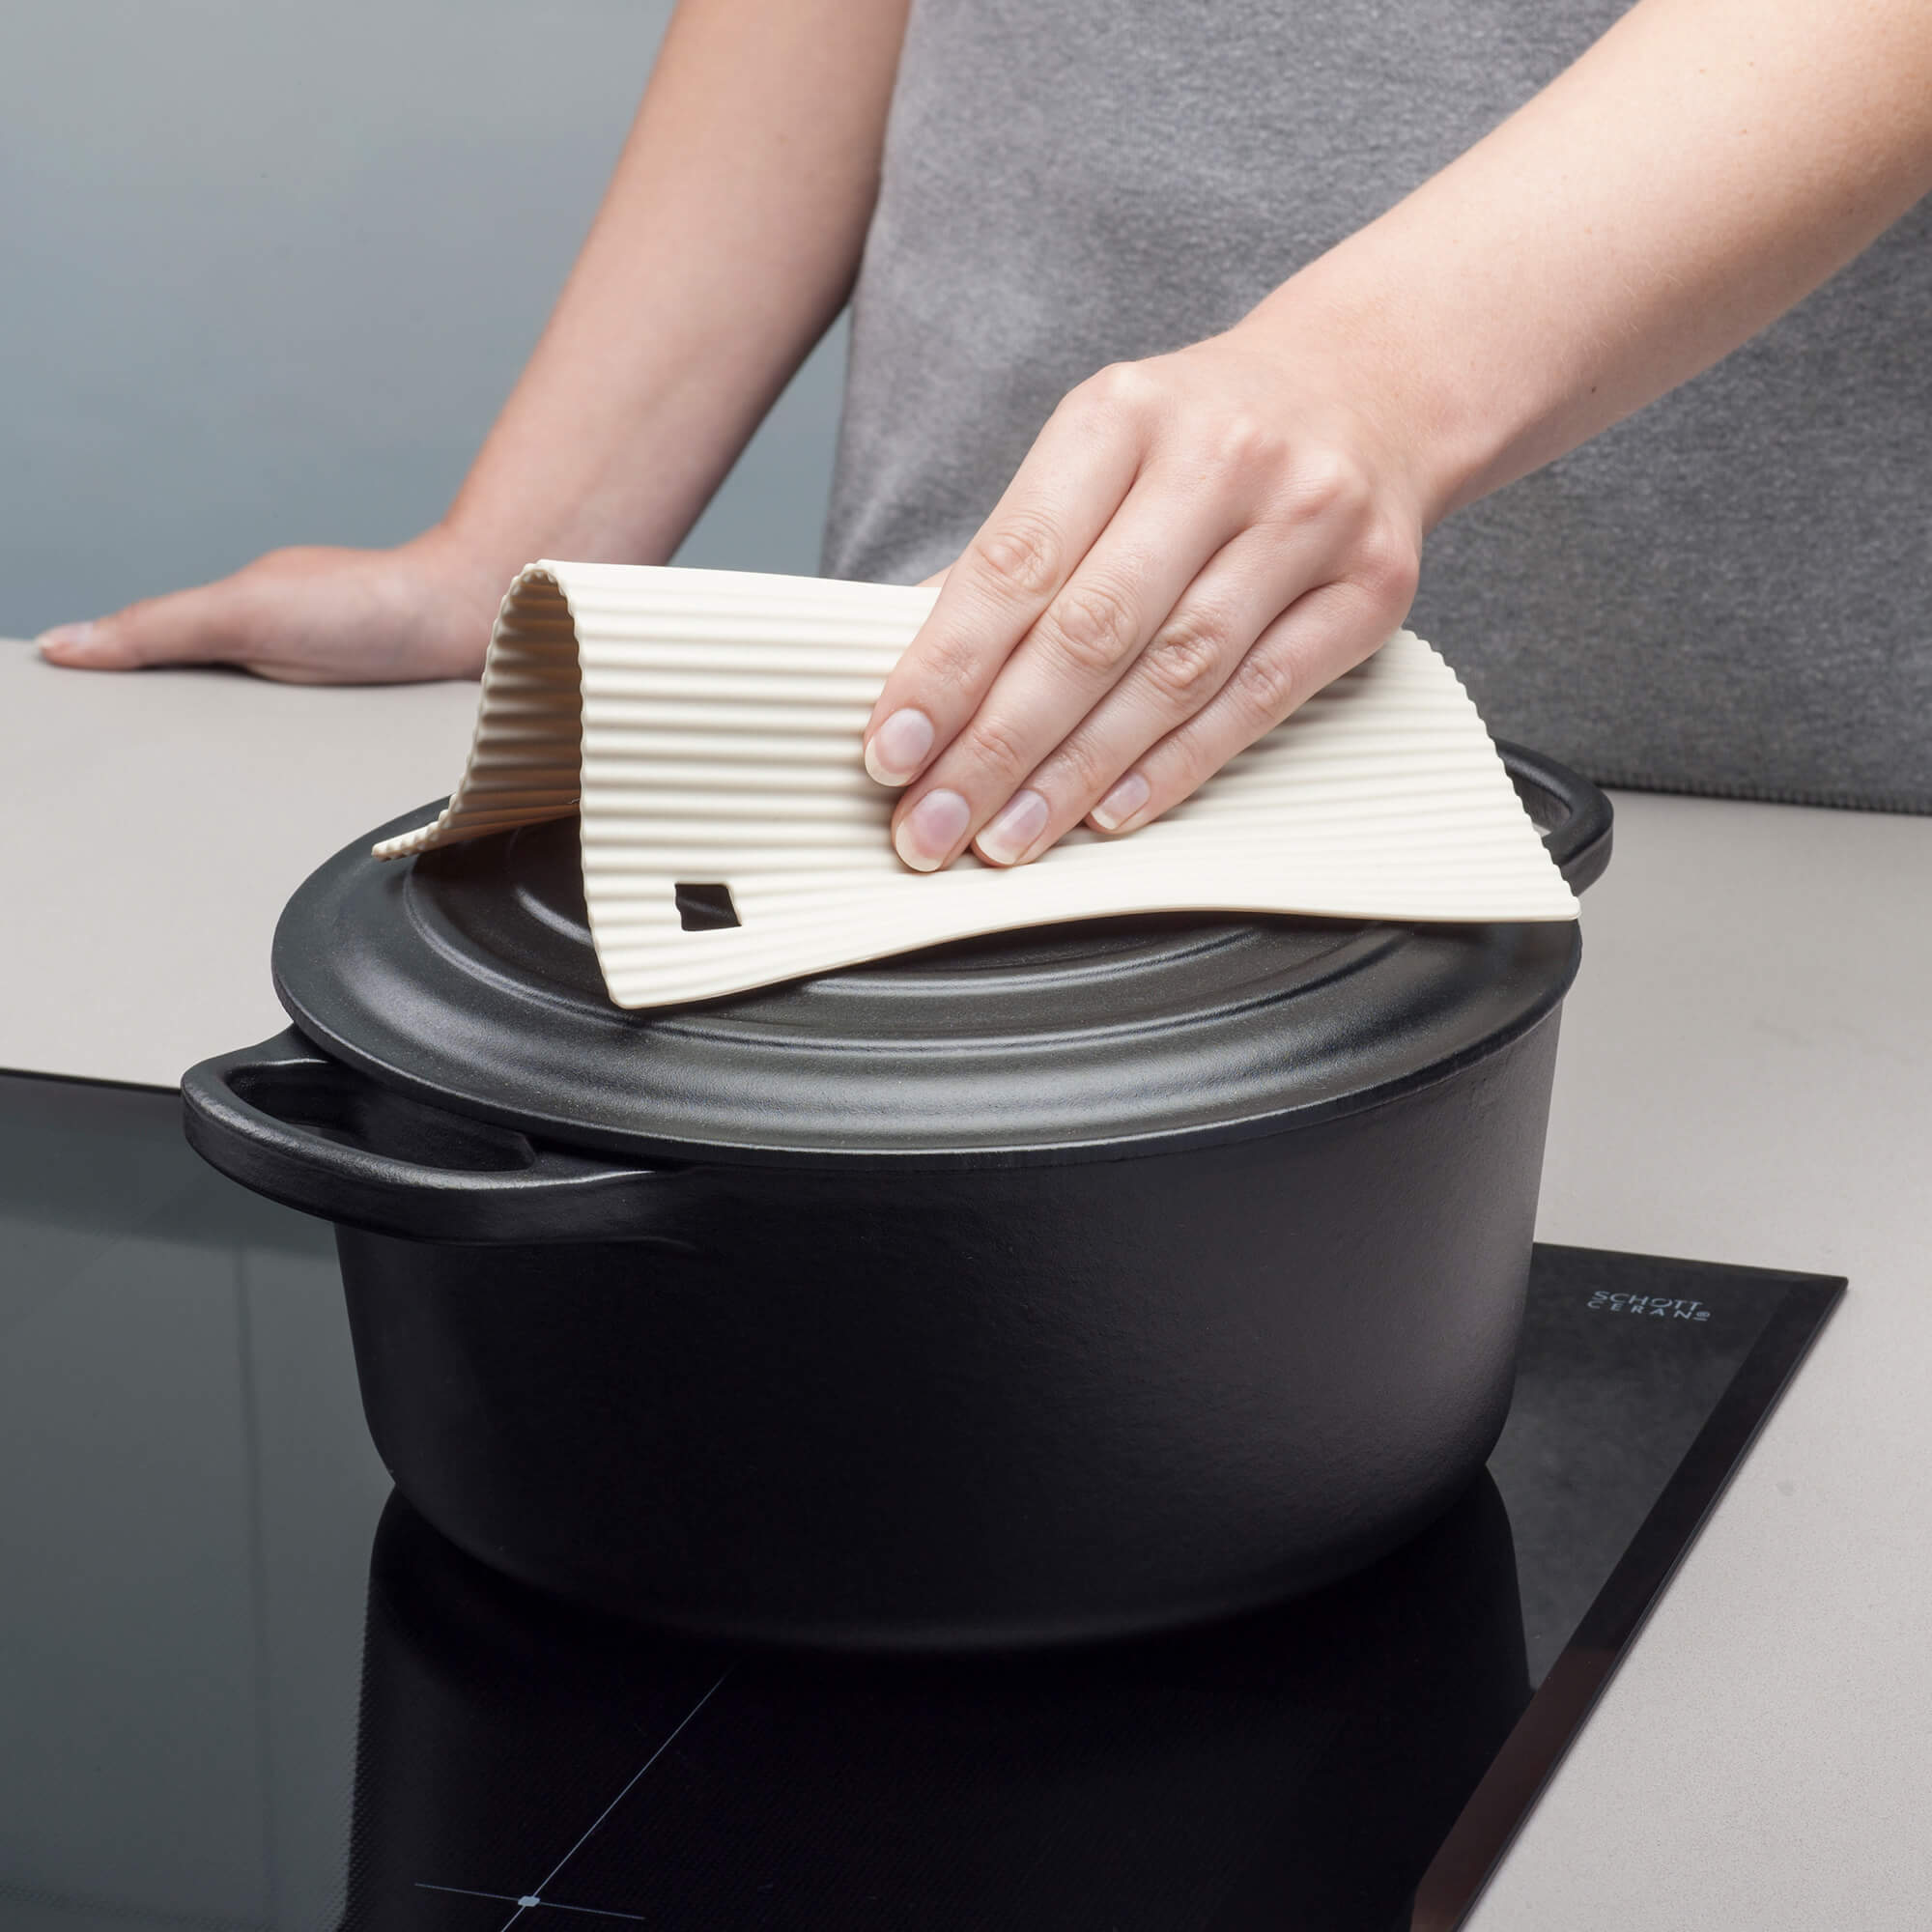 Using a Zeal Silicone Hot Mat to lift a casserole lid